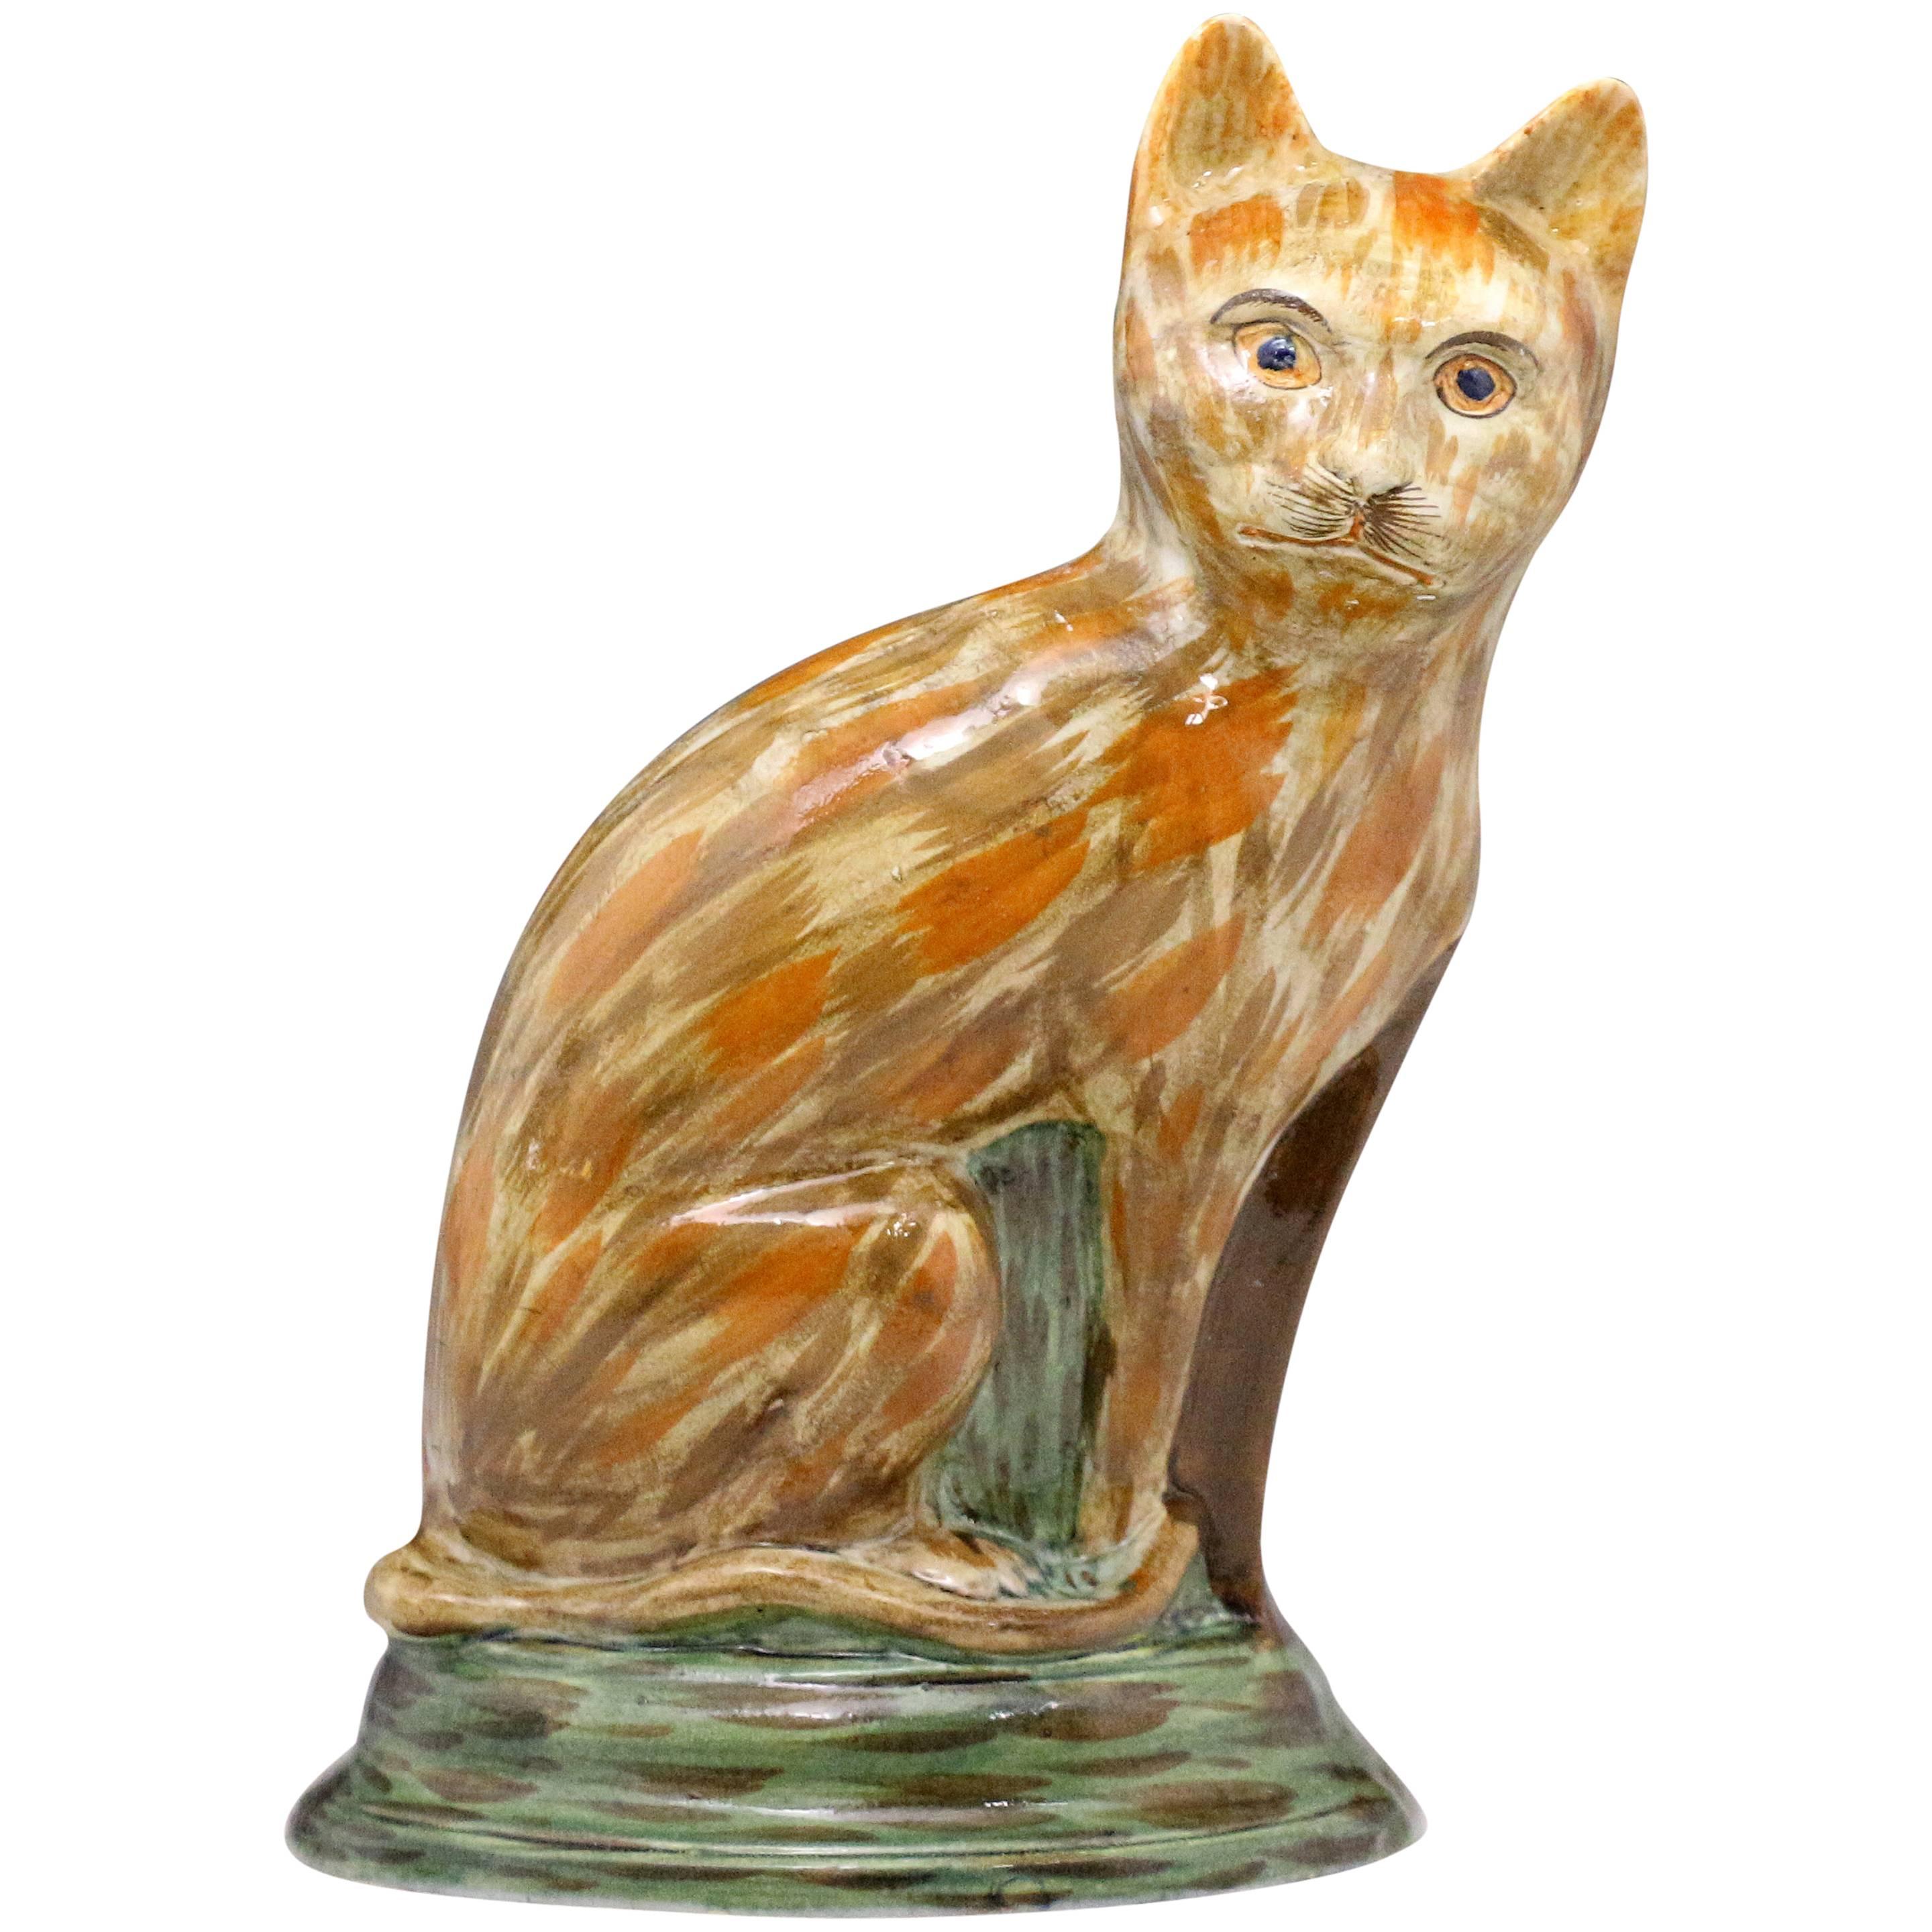 Antique Staffordshire Prattware Pottery Figure of a Seated Cat